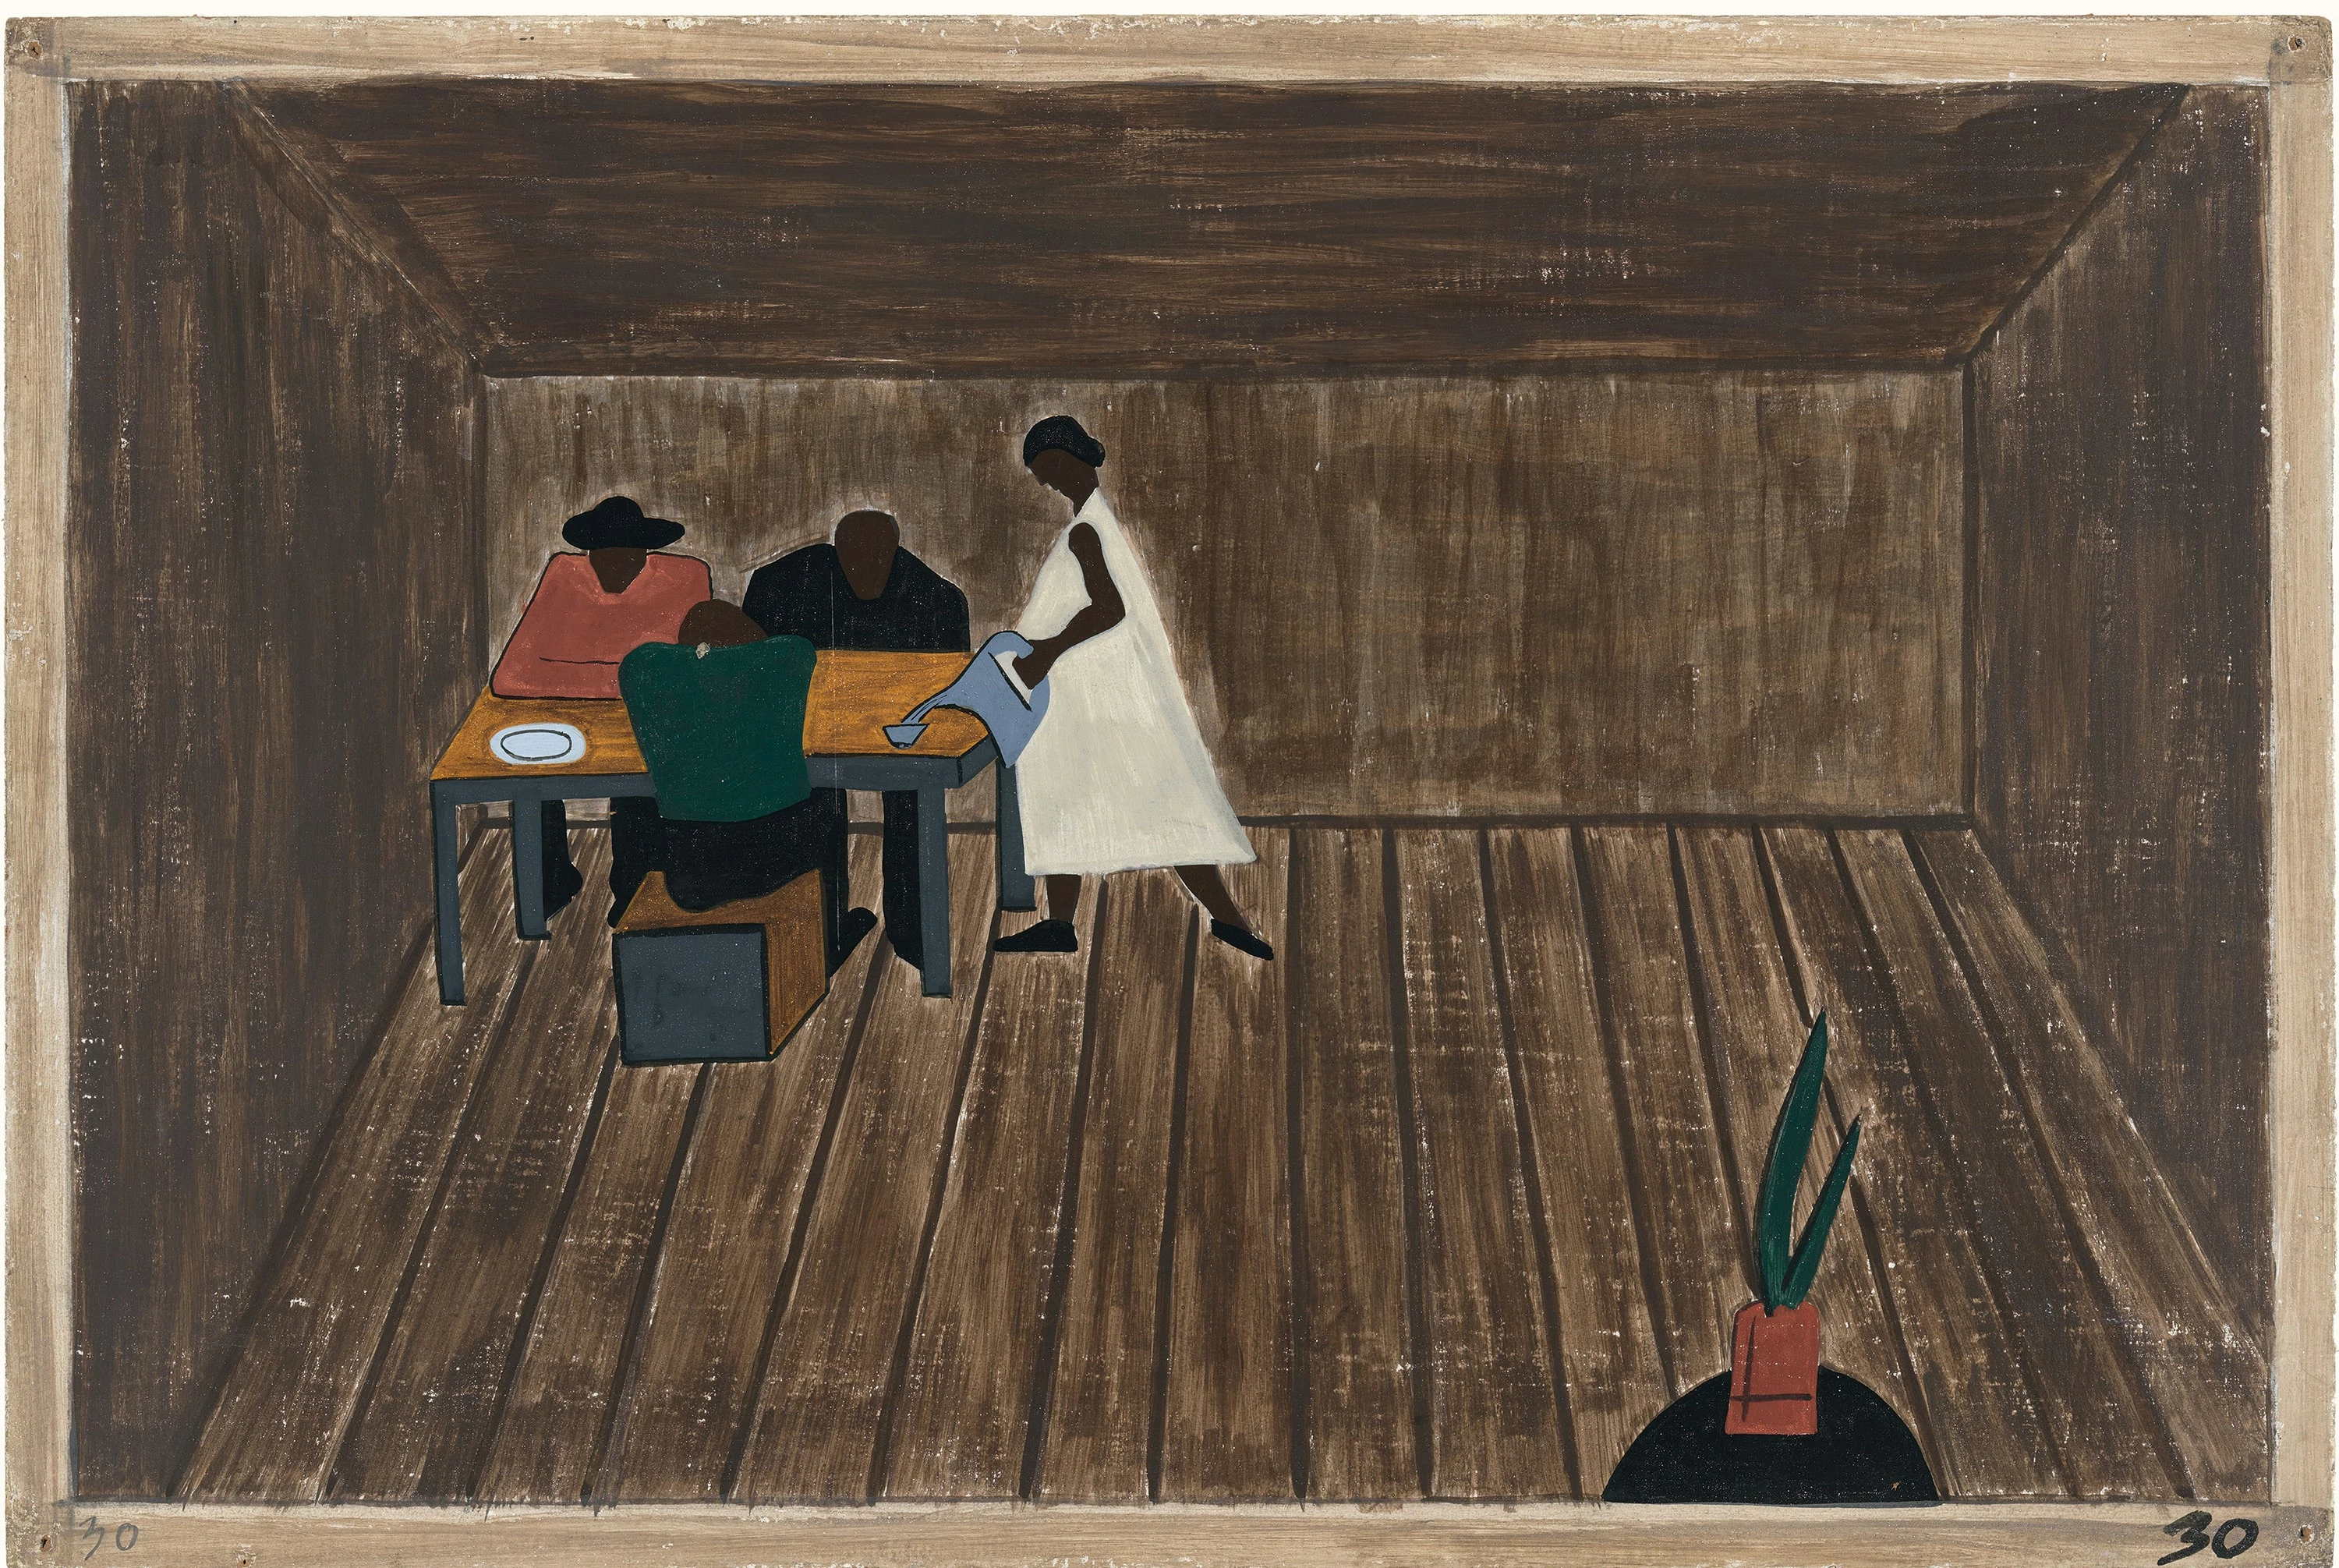 Migration Series No.30: In every southern home people met to decide whether or not to go north, Jacob Lawrence